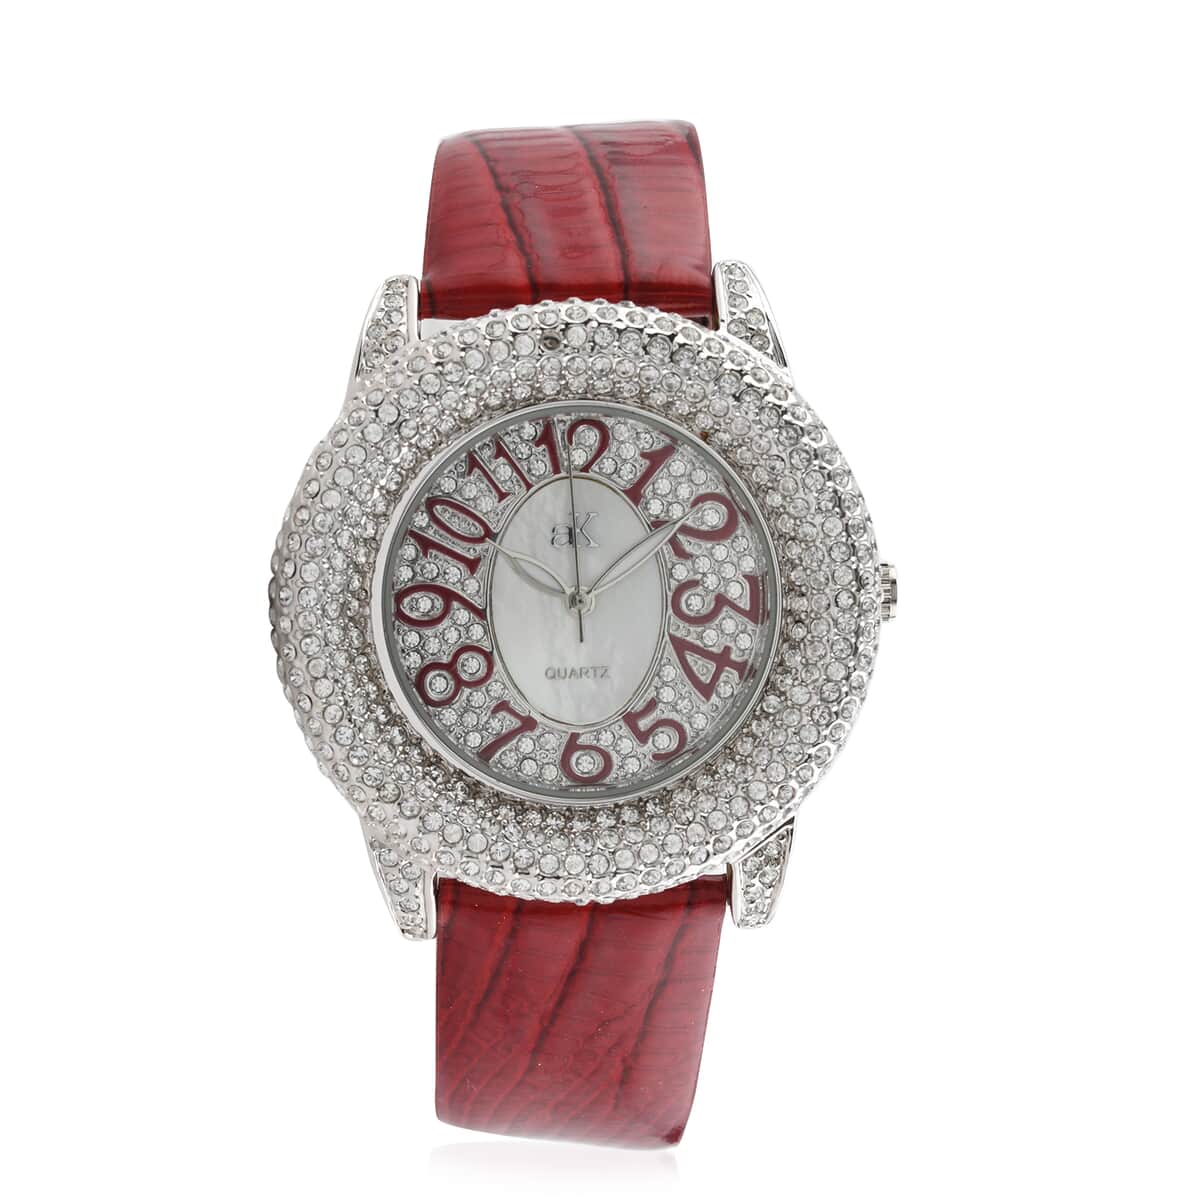 ADEE KAYE Bello Austrian Crystal Japanese Movement Watch with Genuine Leather Strap in Red (43mm) | Best Leather Watch for Women | Designer Women's Wrist Watch image number 0